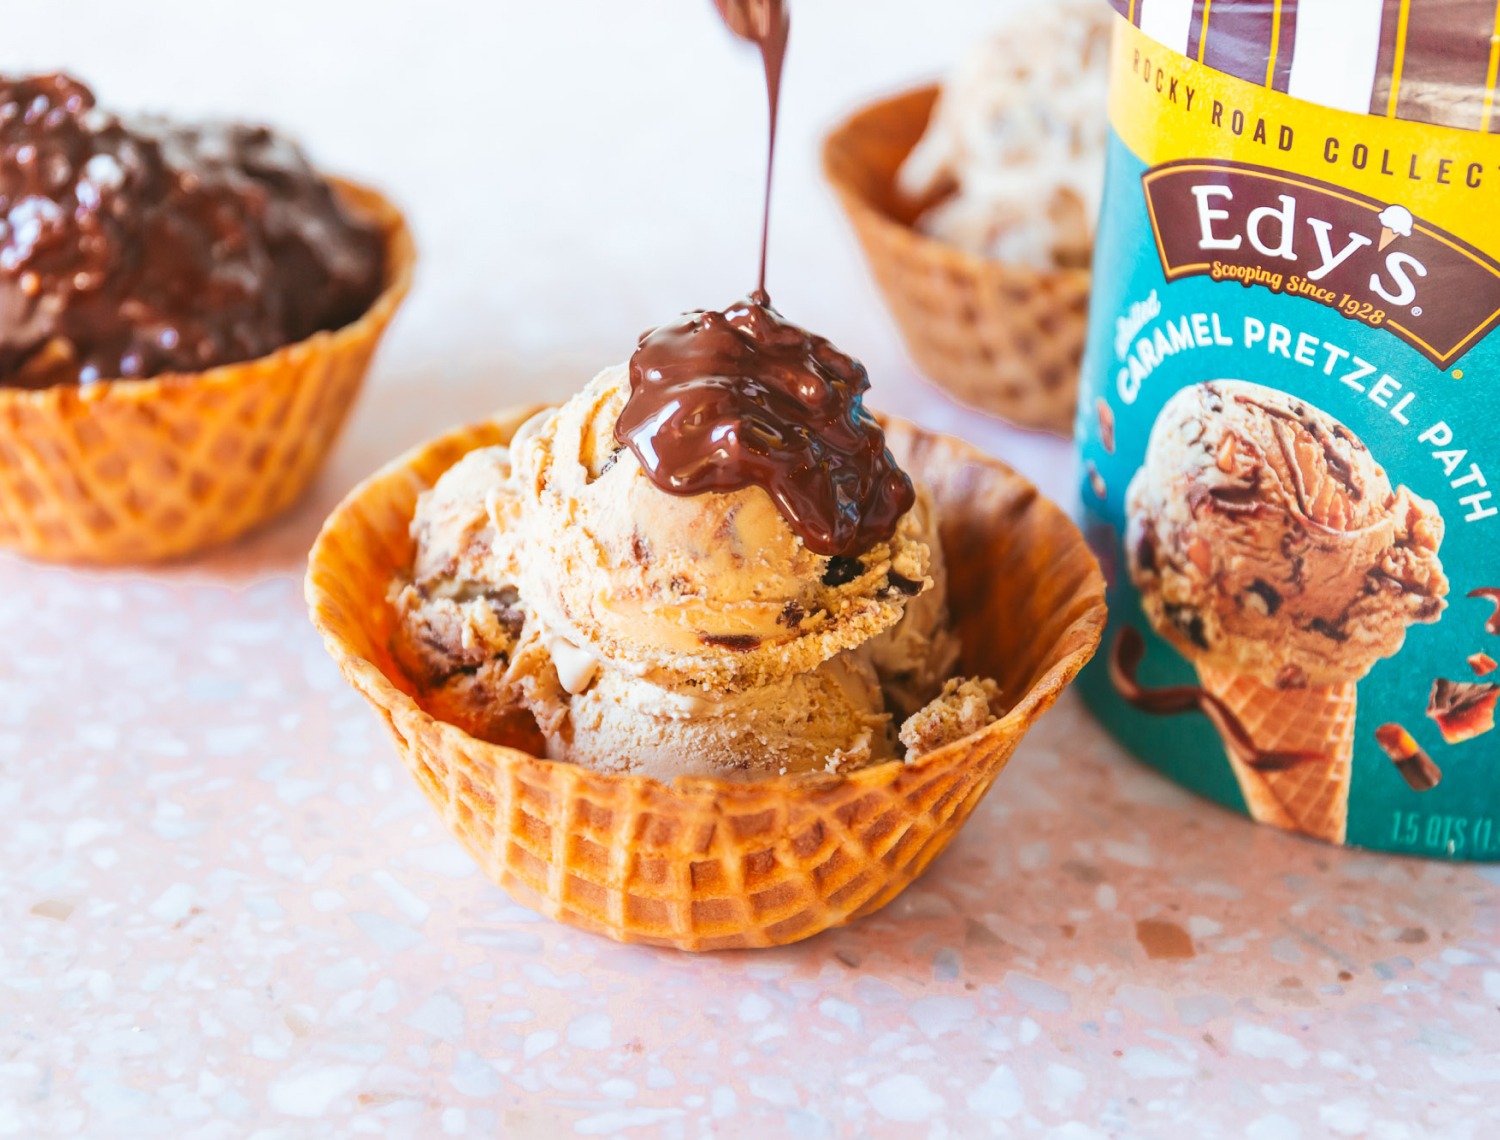 Edy's  salted caramel pretzel path ice cream in a waffle cone bowl with chocolate sauce